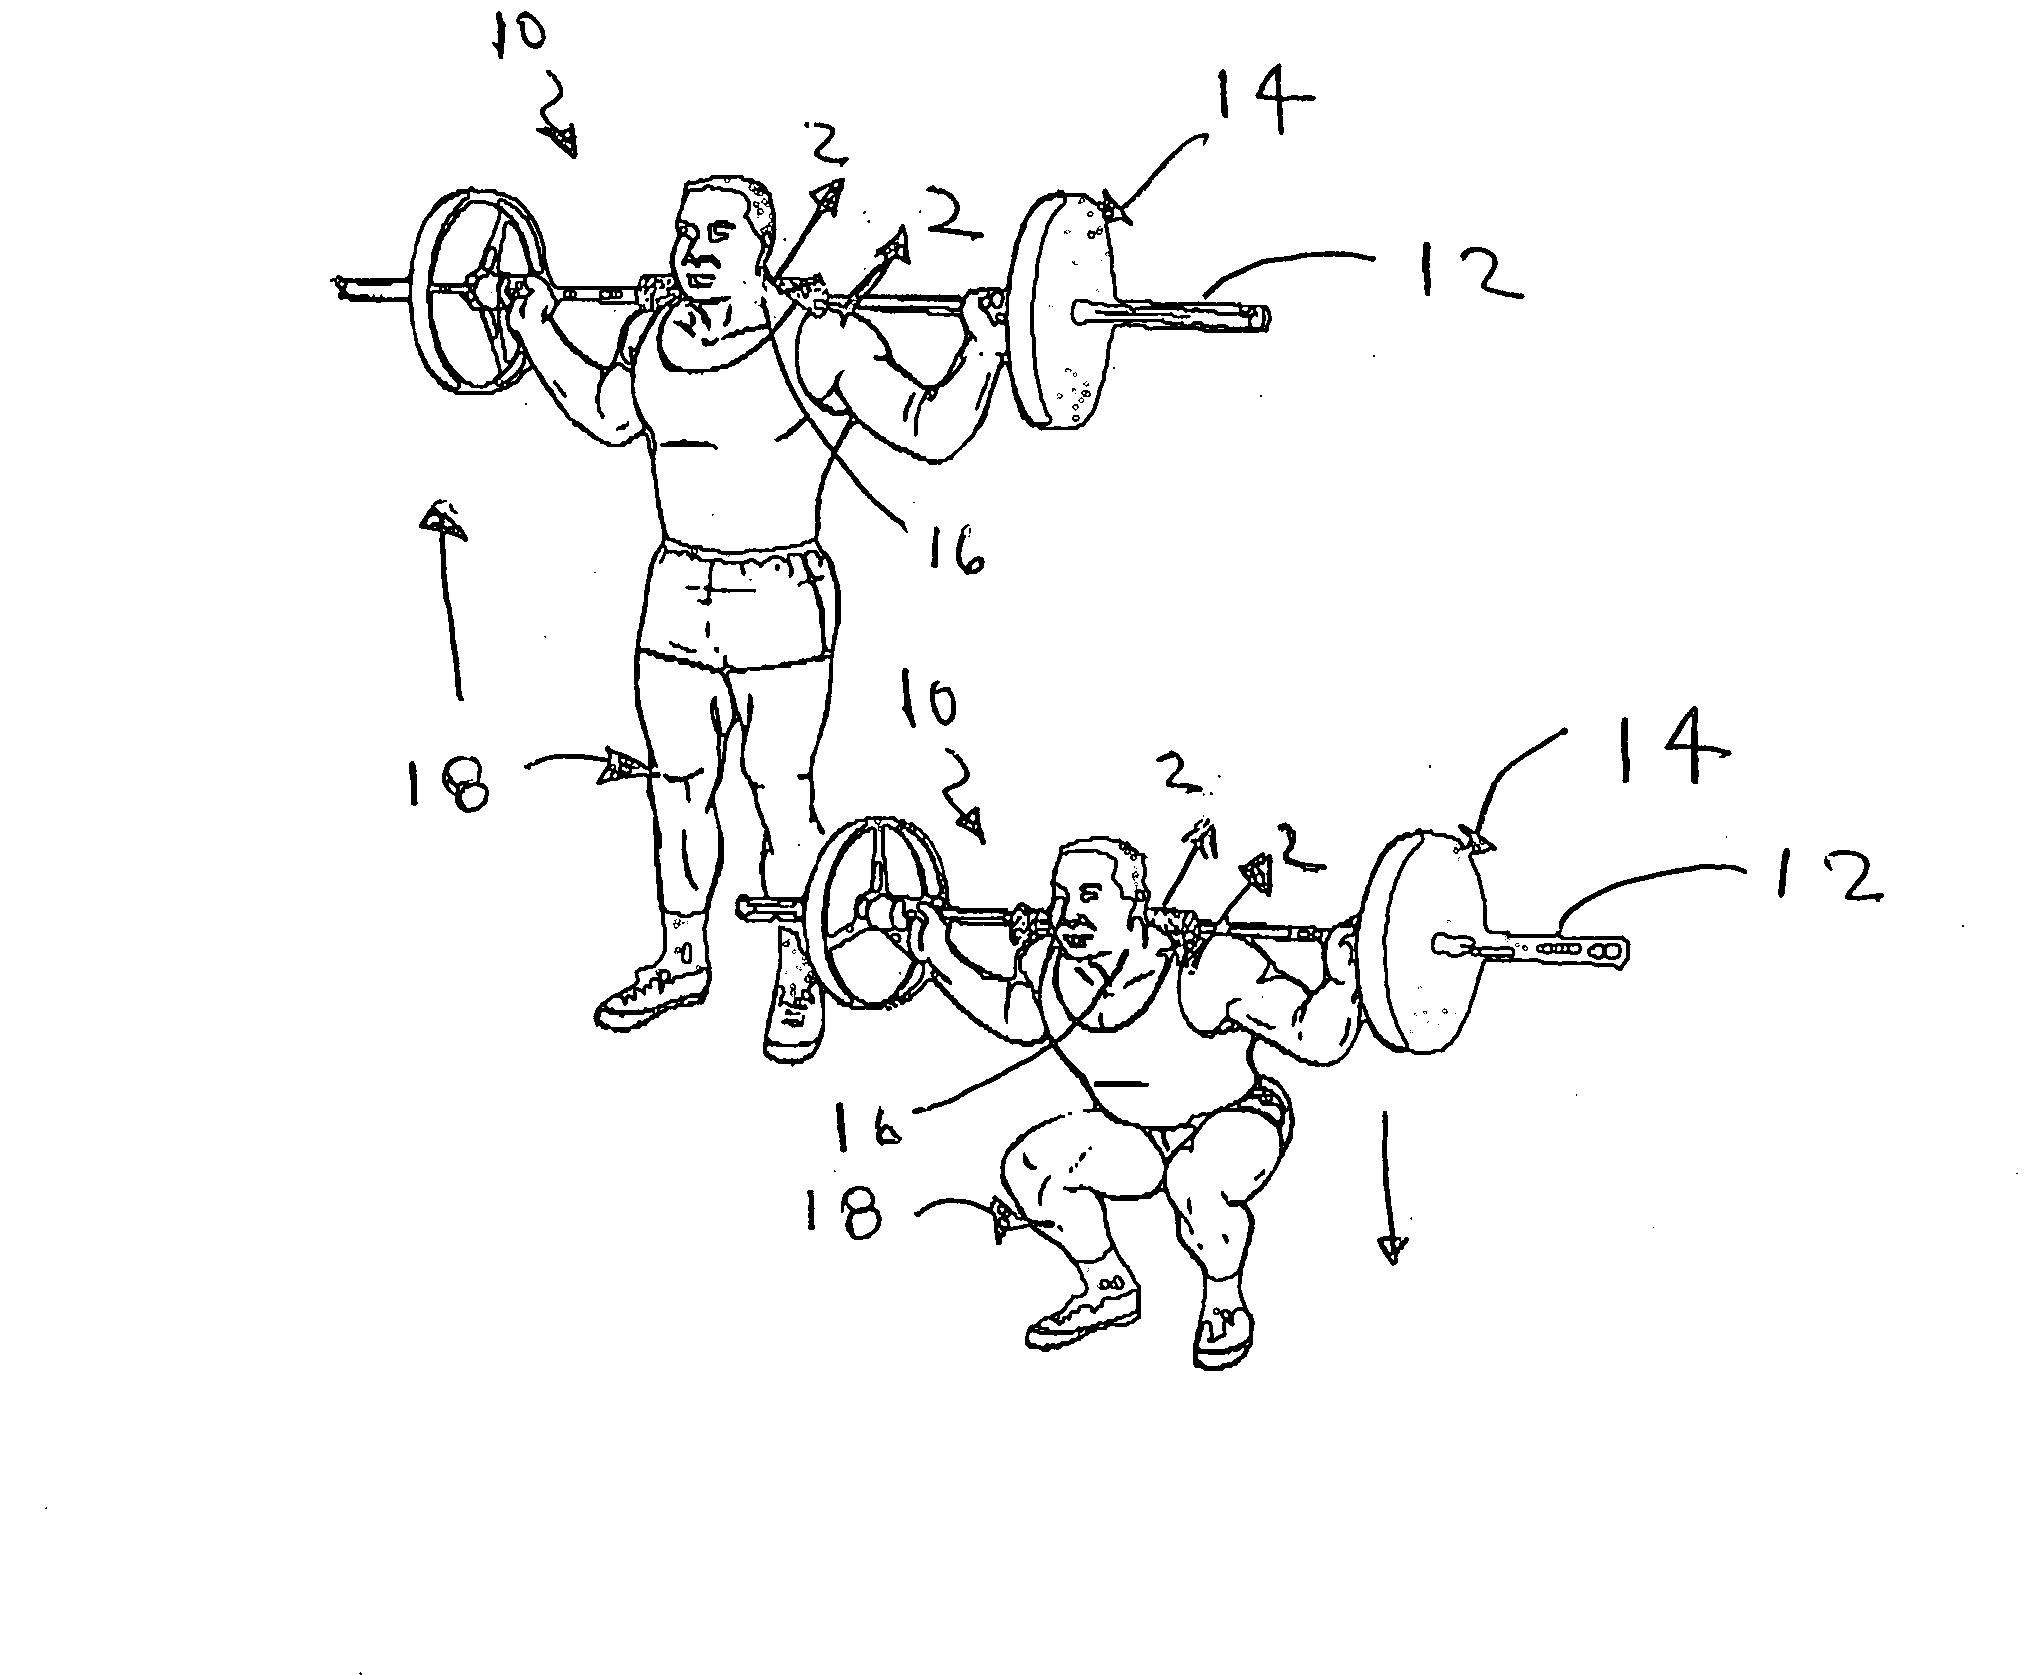 Load-distribution cushion padding for engaging around a bar of a weight-lifting device and for cradling and protecting the cervical spine of a weightlifter by absorbing shock from the bar of the weigh-lifting device while the weight-lifter is doing a squat exercise